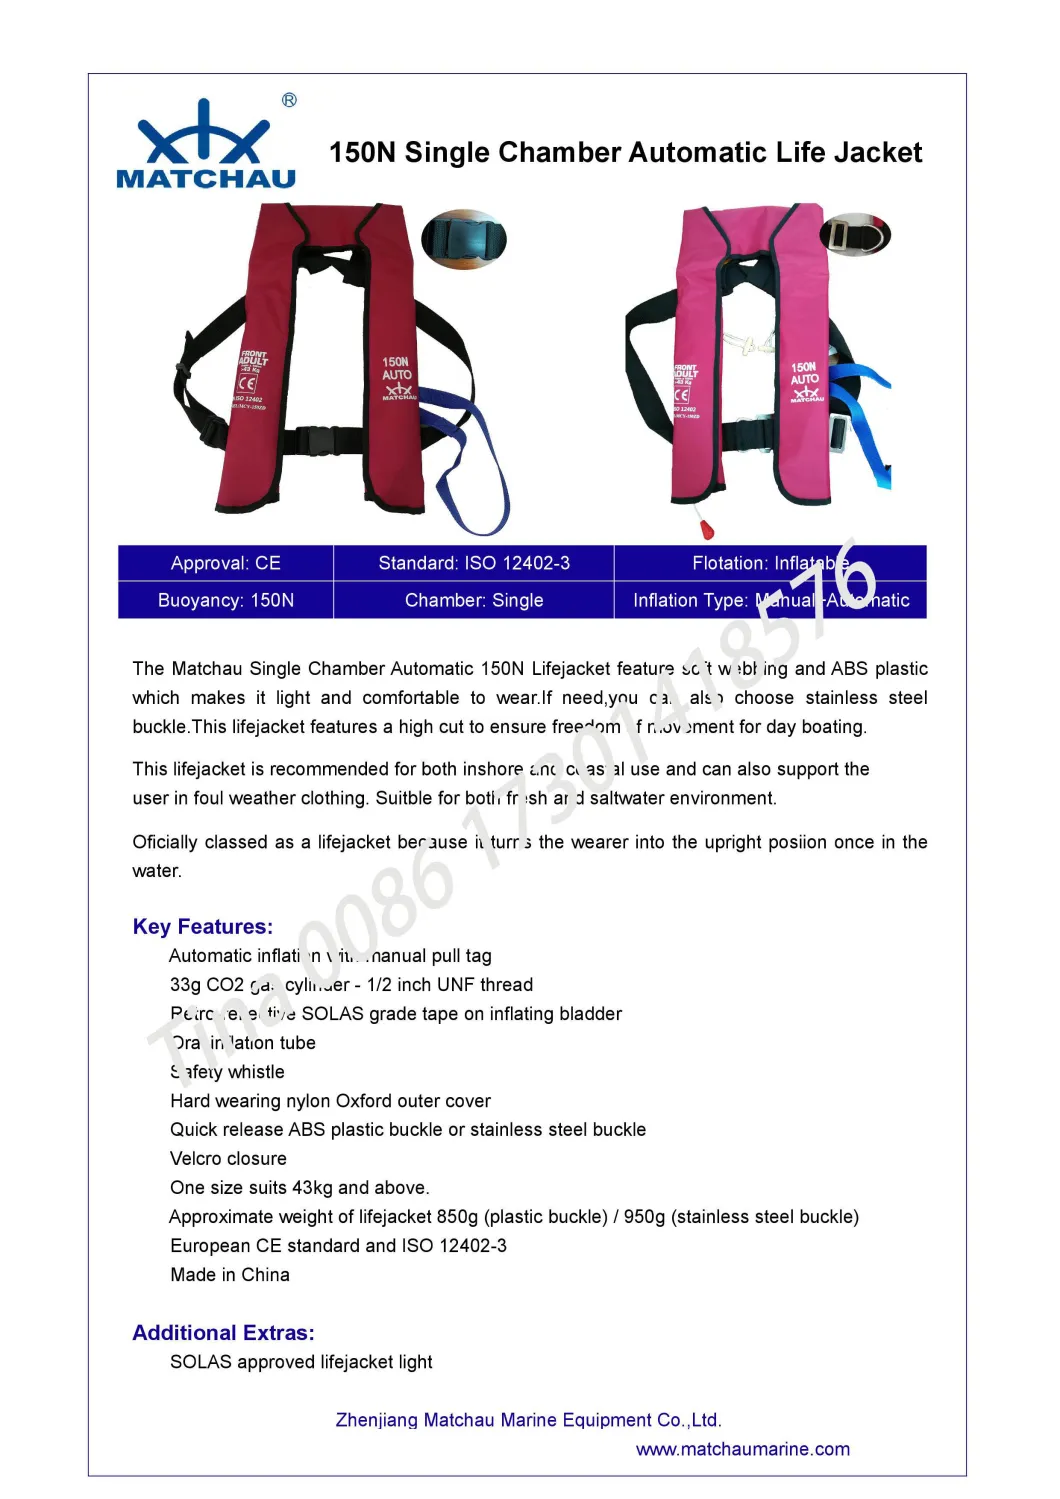 CE Approved 150n Double Air Chamber Inflatable Lifejacket